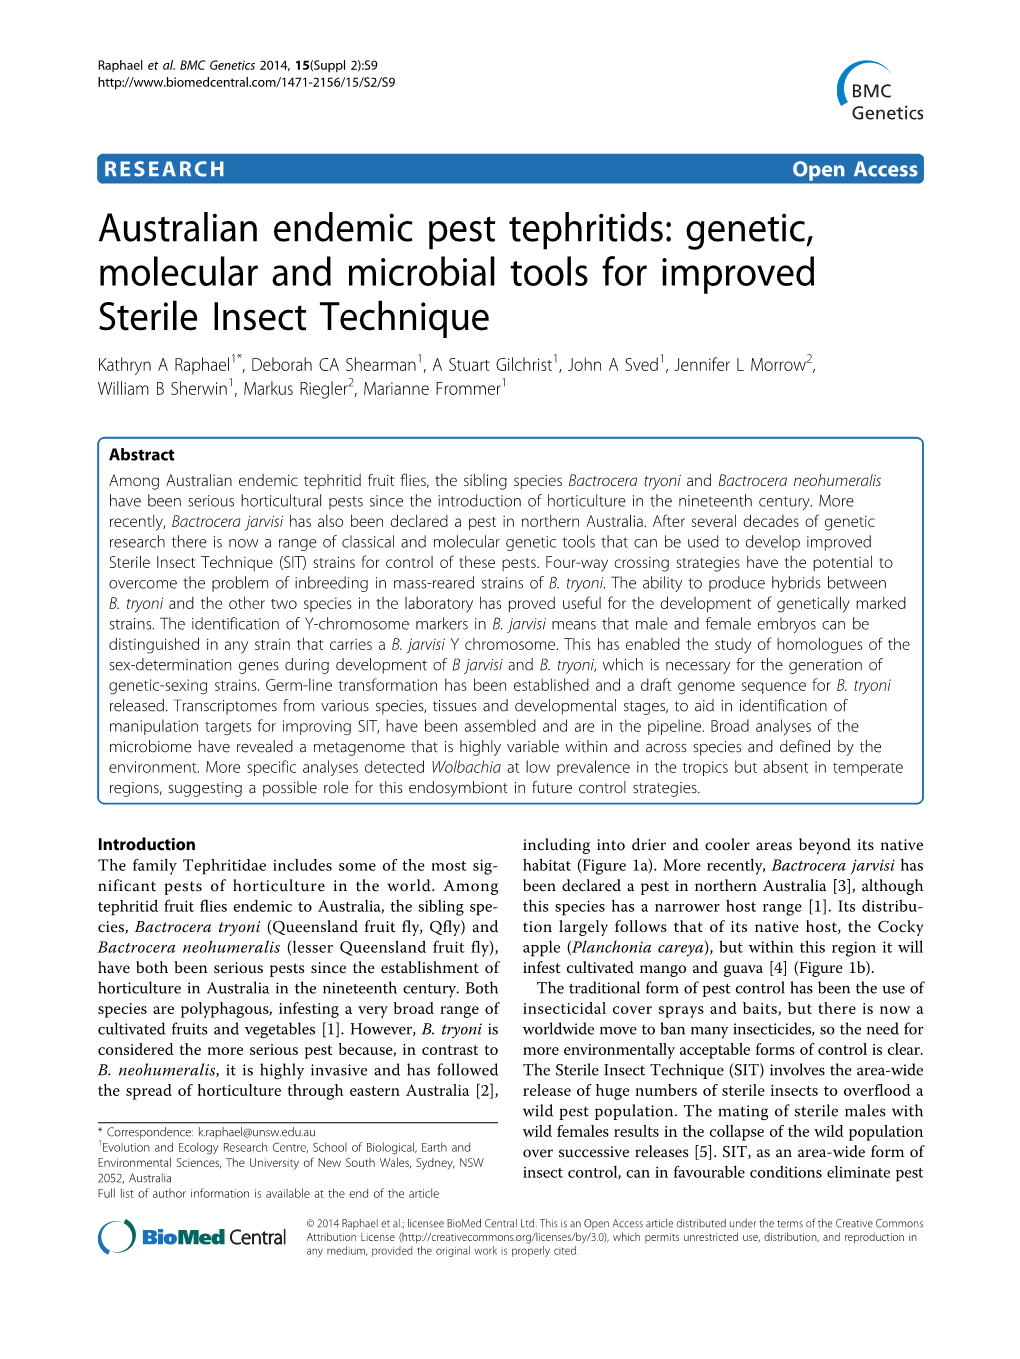 Australian Endemic Pest Tephritids: Genetic, Molecular and Microbial